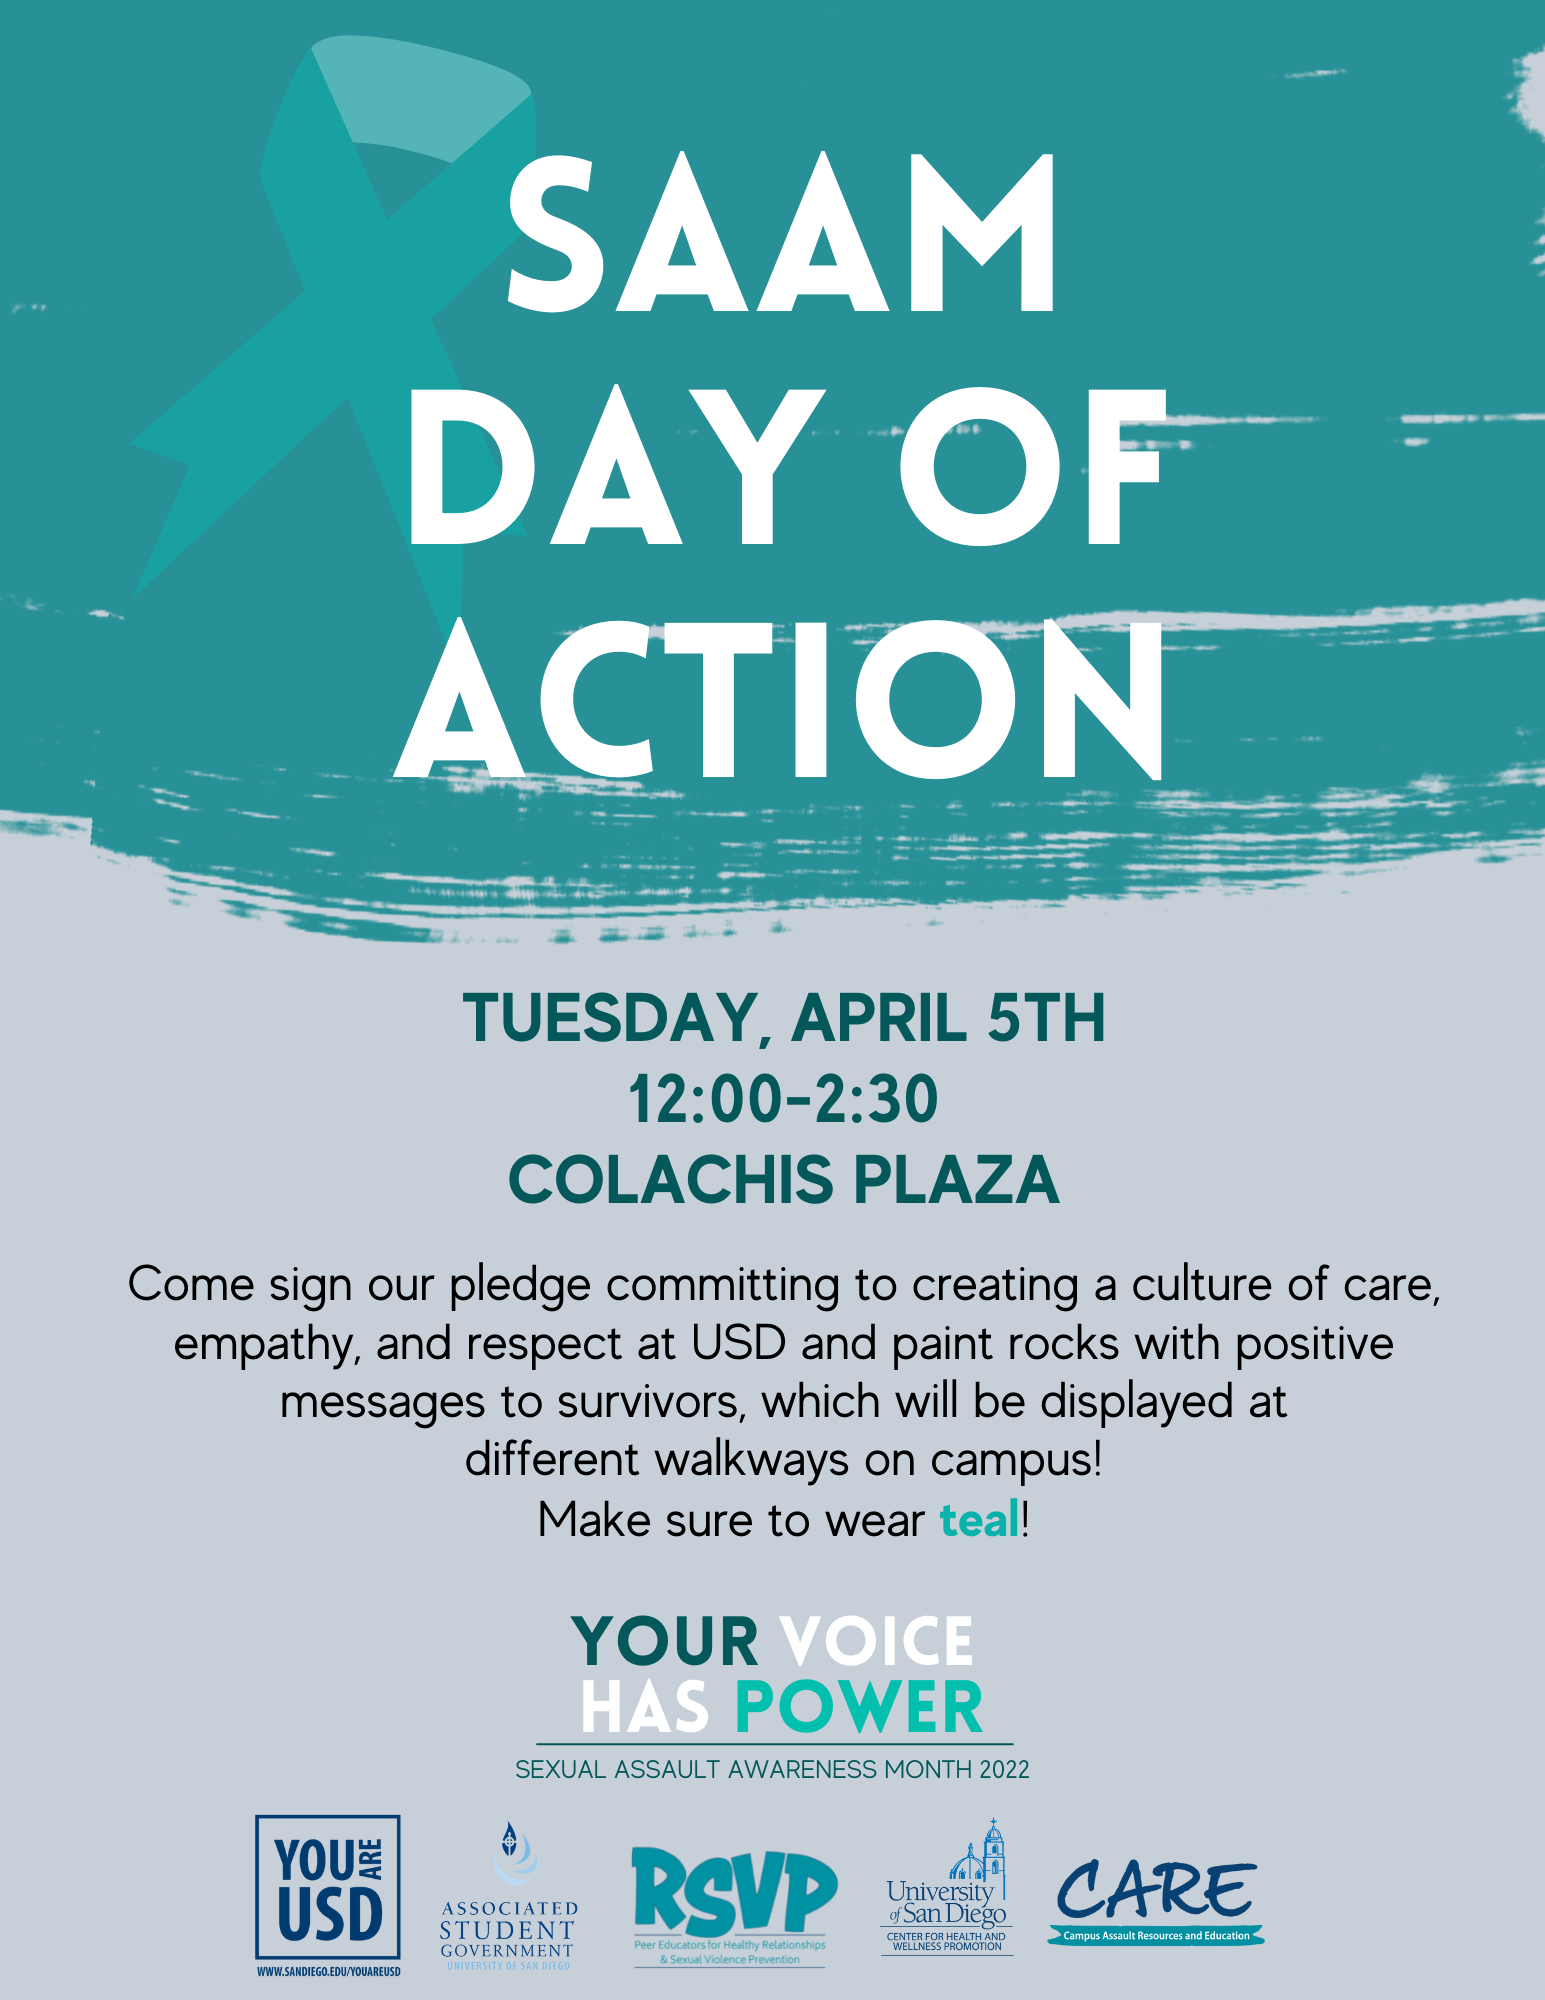 Flier with the following information: SAAM Day of Action, Tuesday, April 5th, 12:00-2:30, Colachis Plaza. Make sure to wear teal!